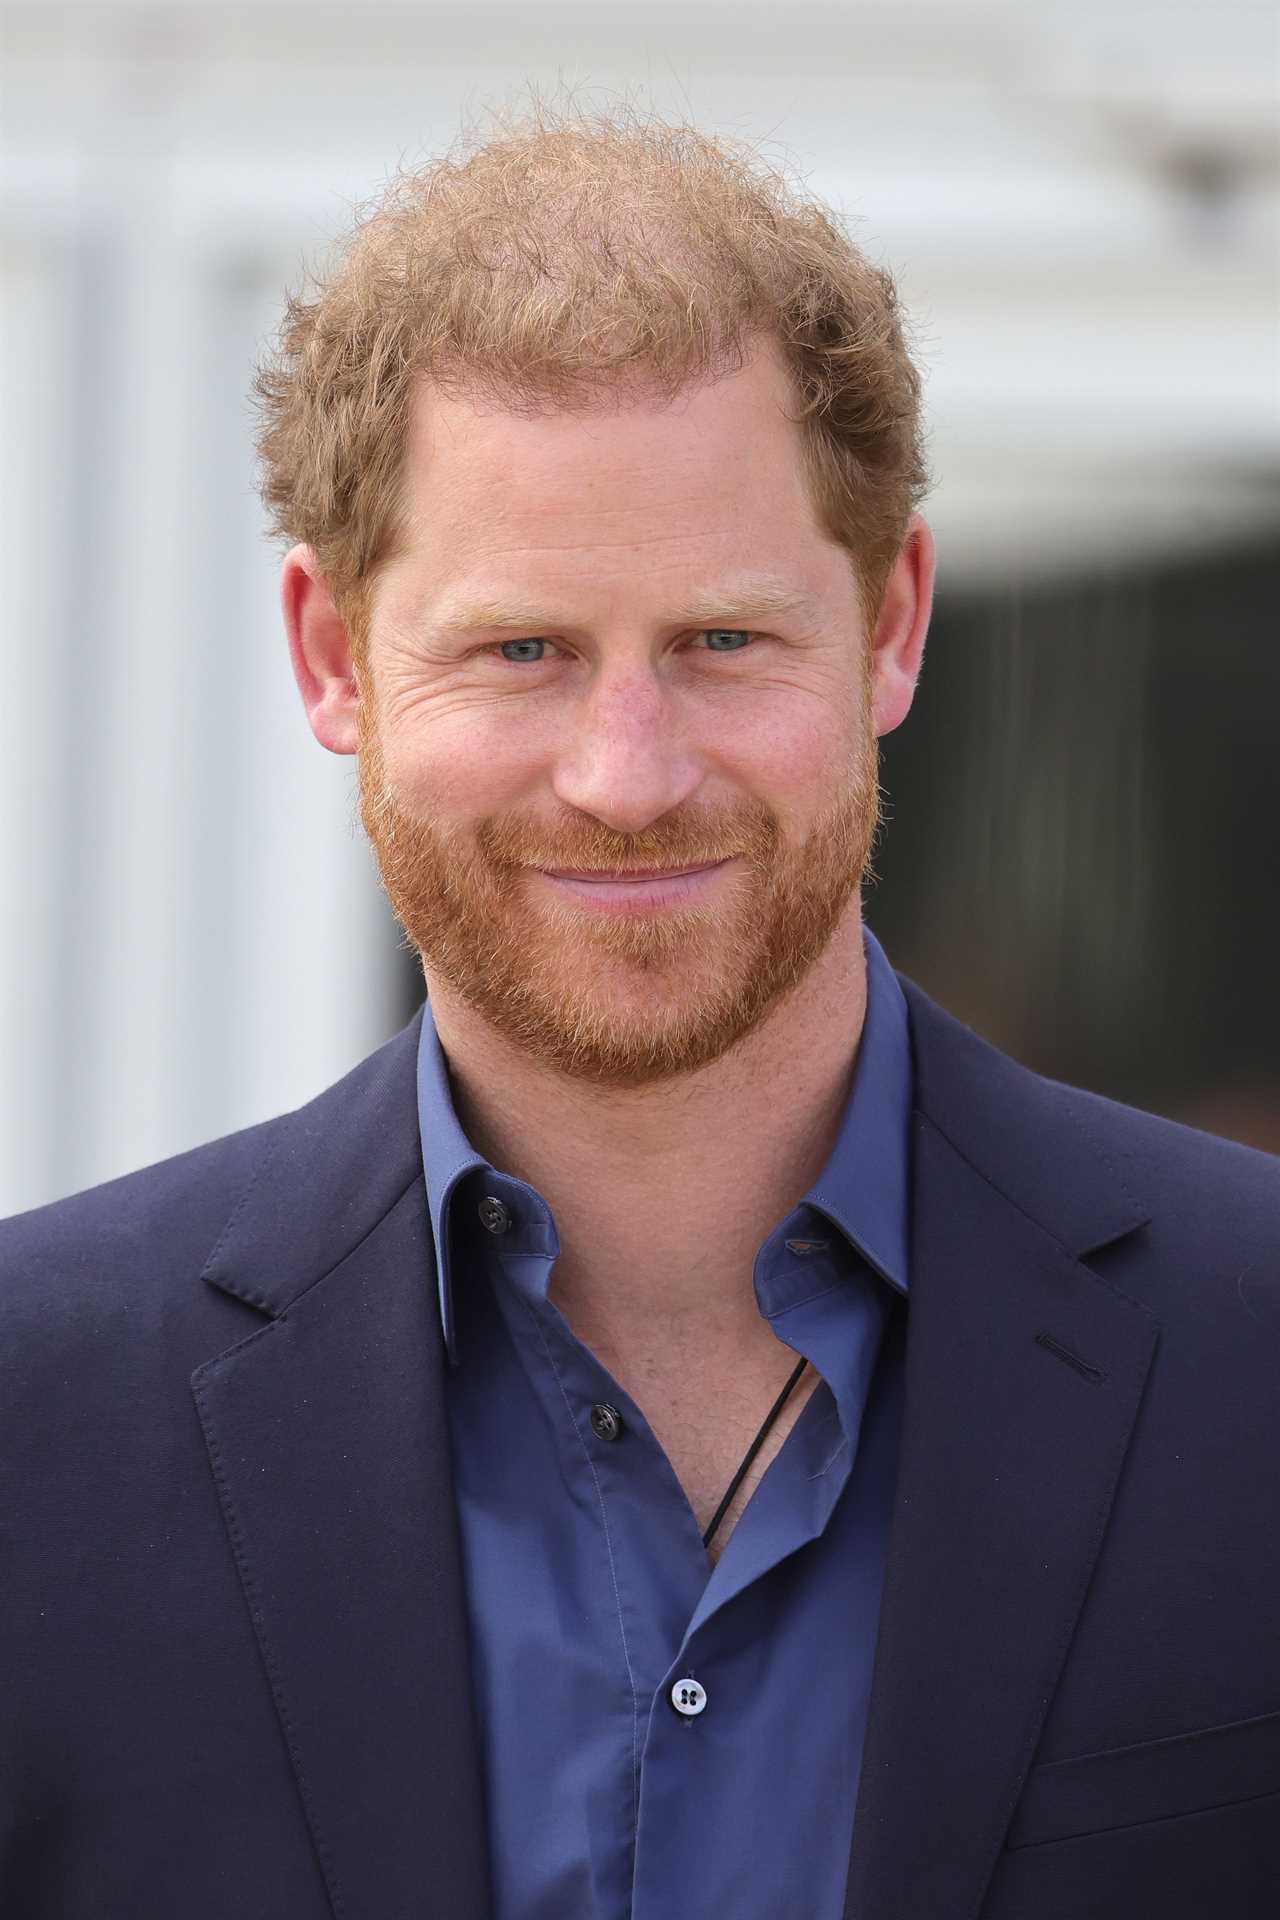 I know who Prince Harry lost his virginity to… and it wasn’t behind a pub like he claims in his memoir